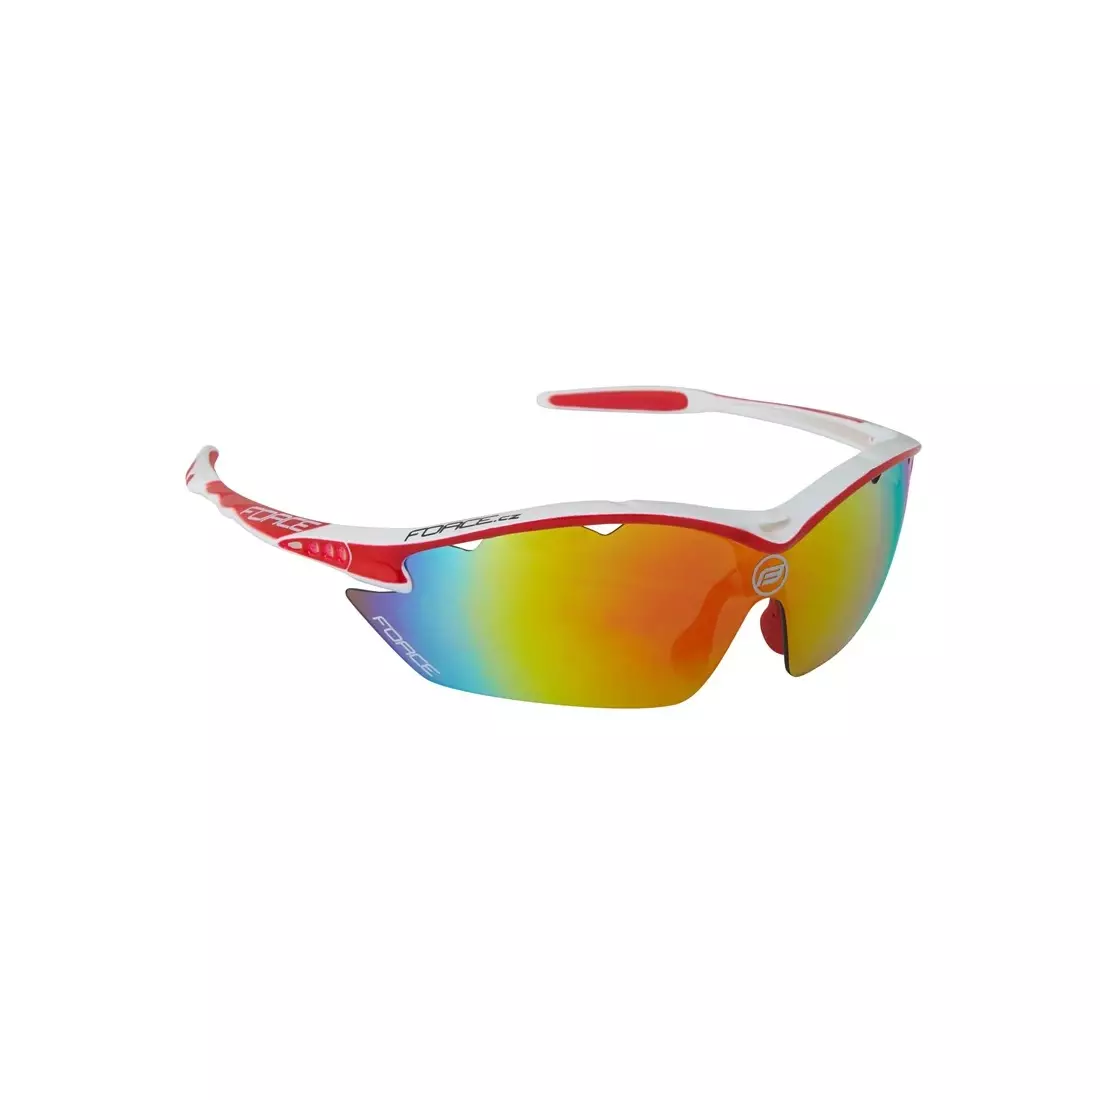 FORCE RON Cycling/sports glasses white and red 91011 replaceable lenses